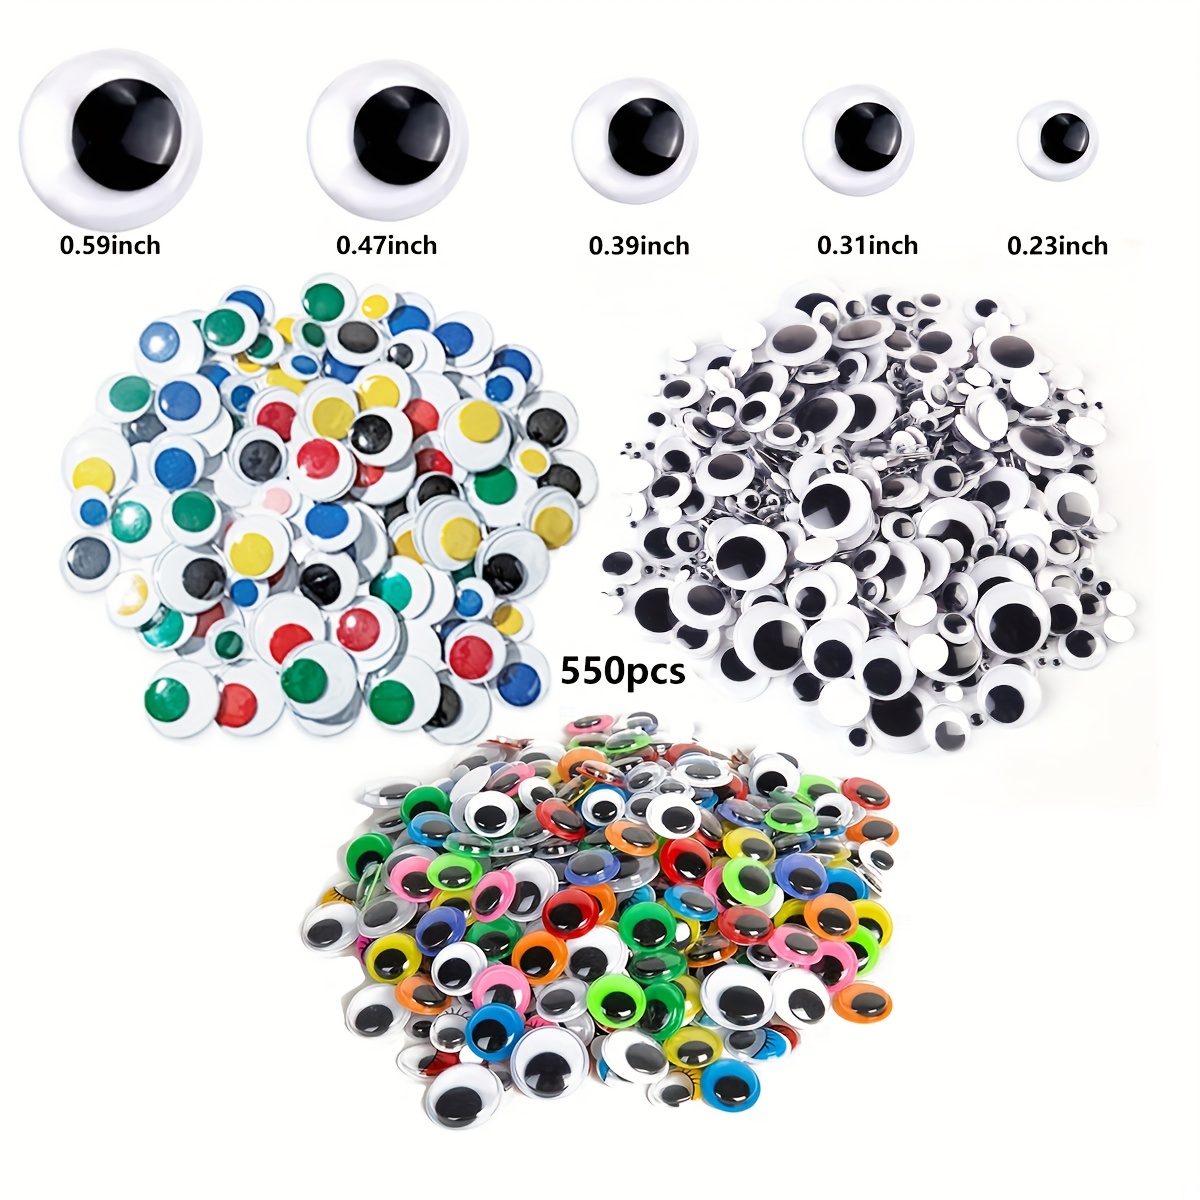 

550pcs Self Adhesive For Crafts, Craft Sticker Wiggle Eyes With Multi Colored And Sizes For Diy (mixed Sizes)